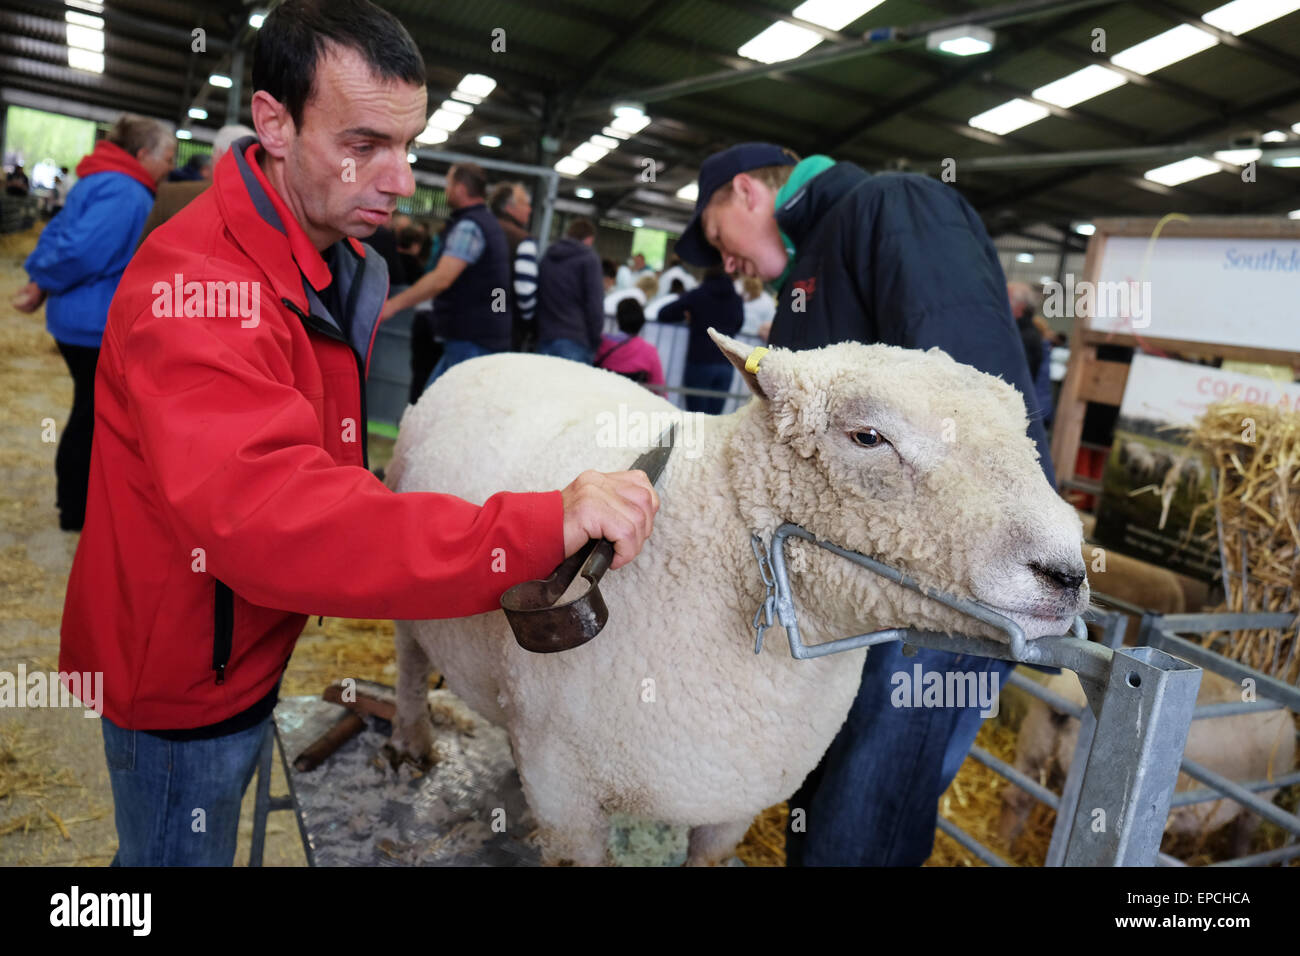 Royal Welsh Spring Festival, Builth Wells, Powys, Wales, UK 16th May, 2015. Farmer Dylan Williams from Aberaeron uses hand clipper blades to trim the wool coat on his Southdown ram prior to entering the sheep for judging. Stock Photo